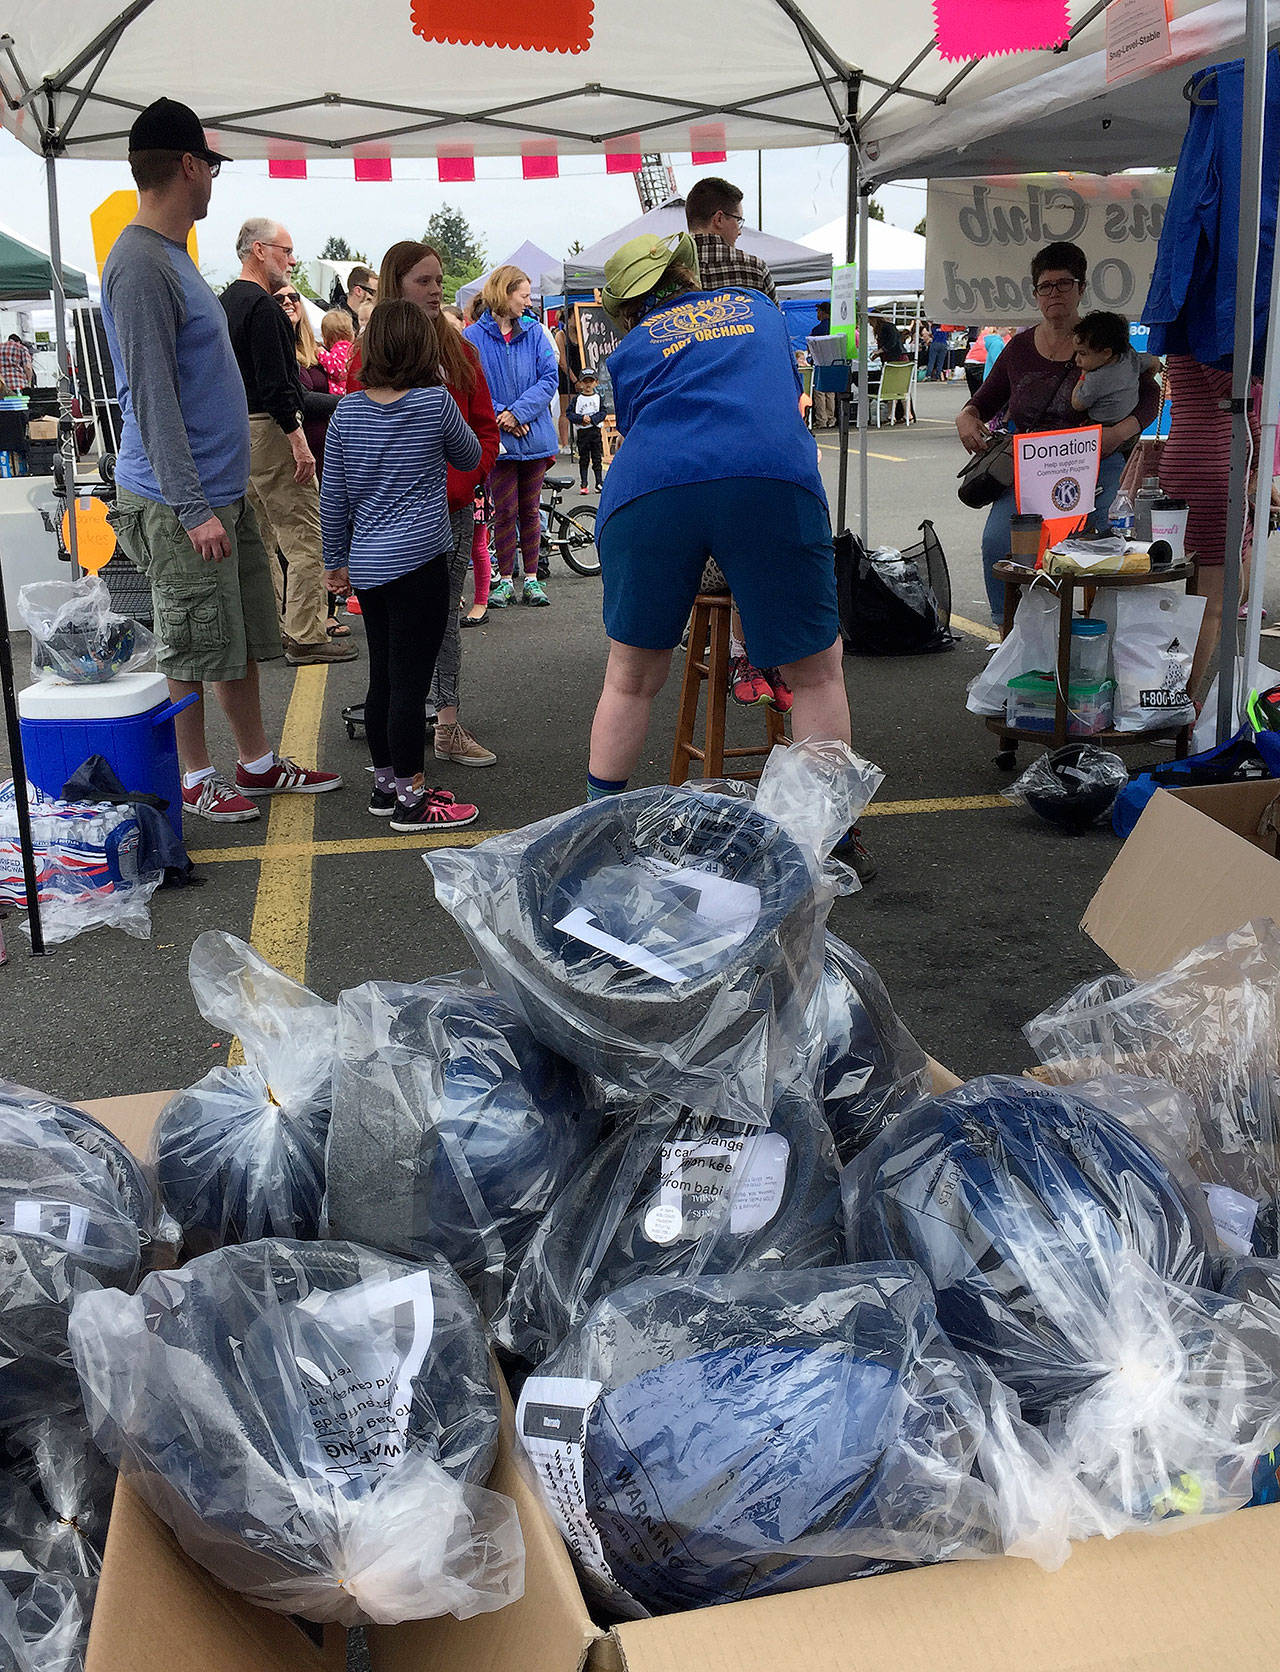 Hundreds of new bicycle helmets (in the foreground) wait to be handed out to children after they are fitted for the proper size at the Safety Fair and Bicycle Rodeo May 19 in Port Orchard. (Bob Smith | Kitsap Daily News)